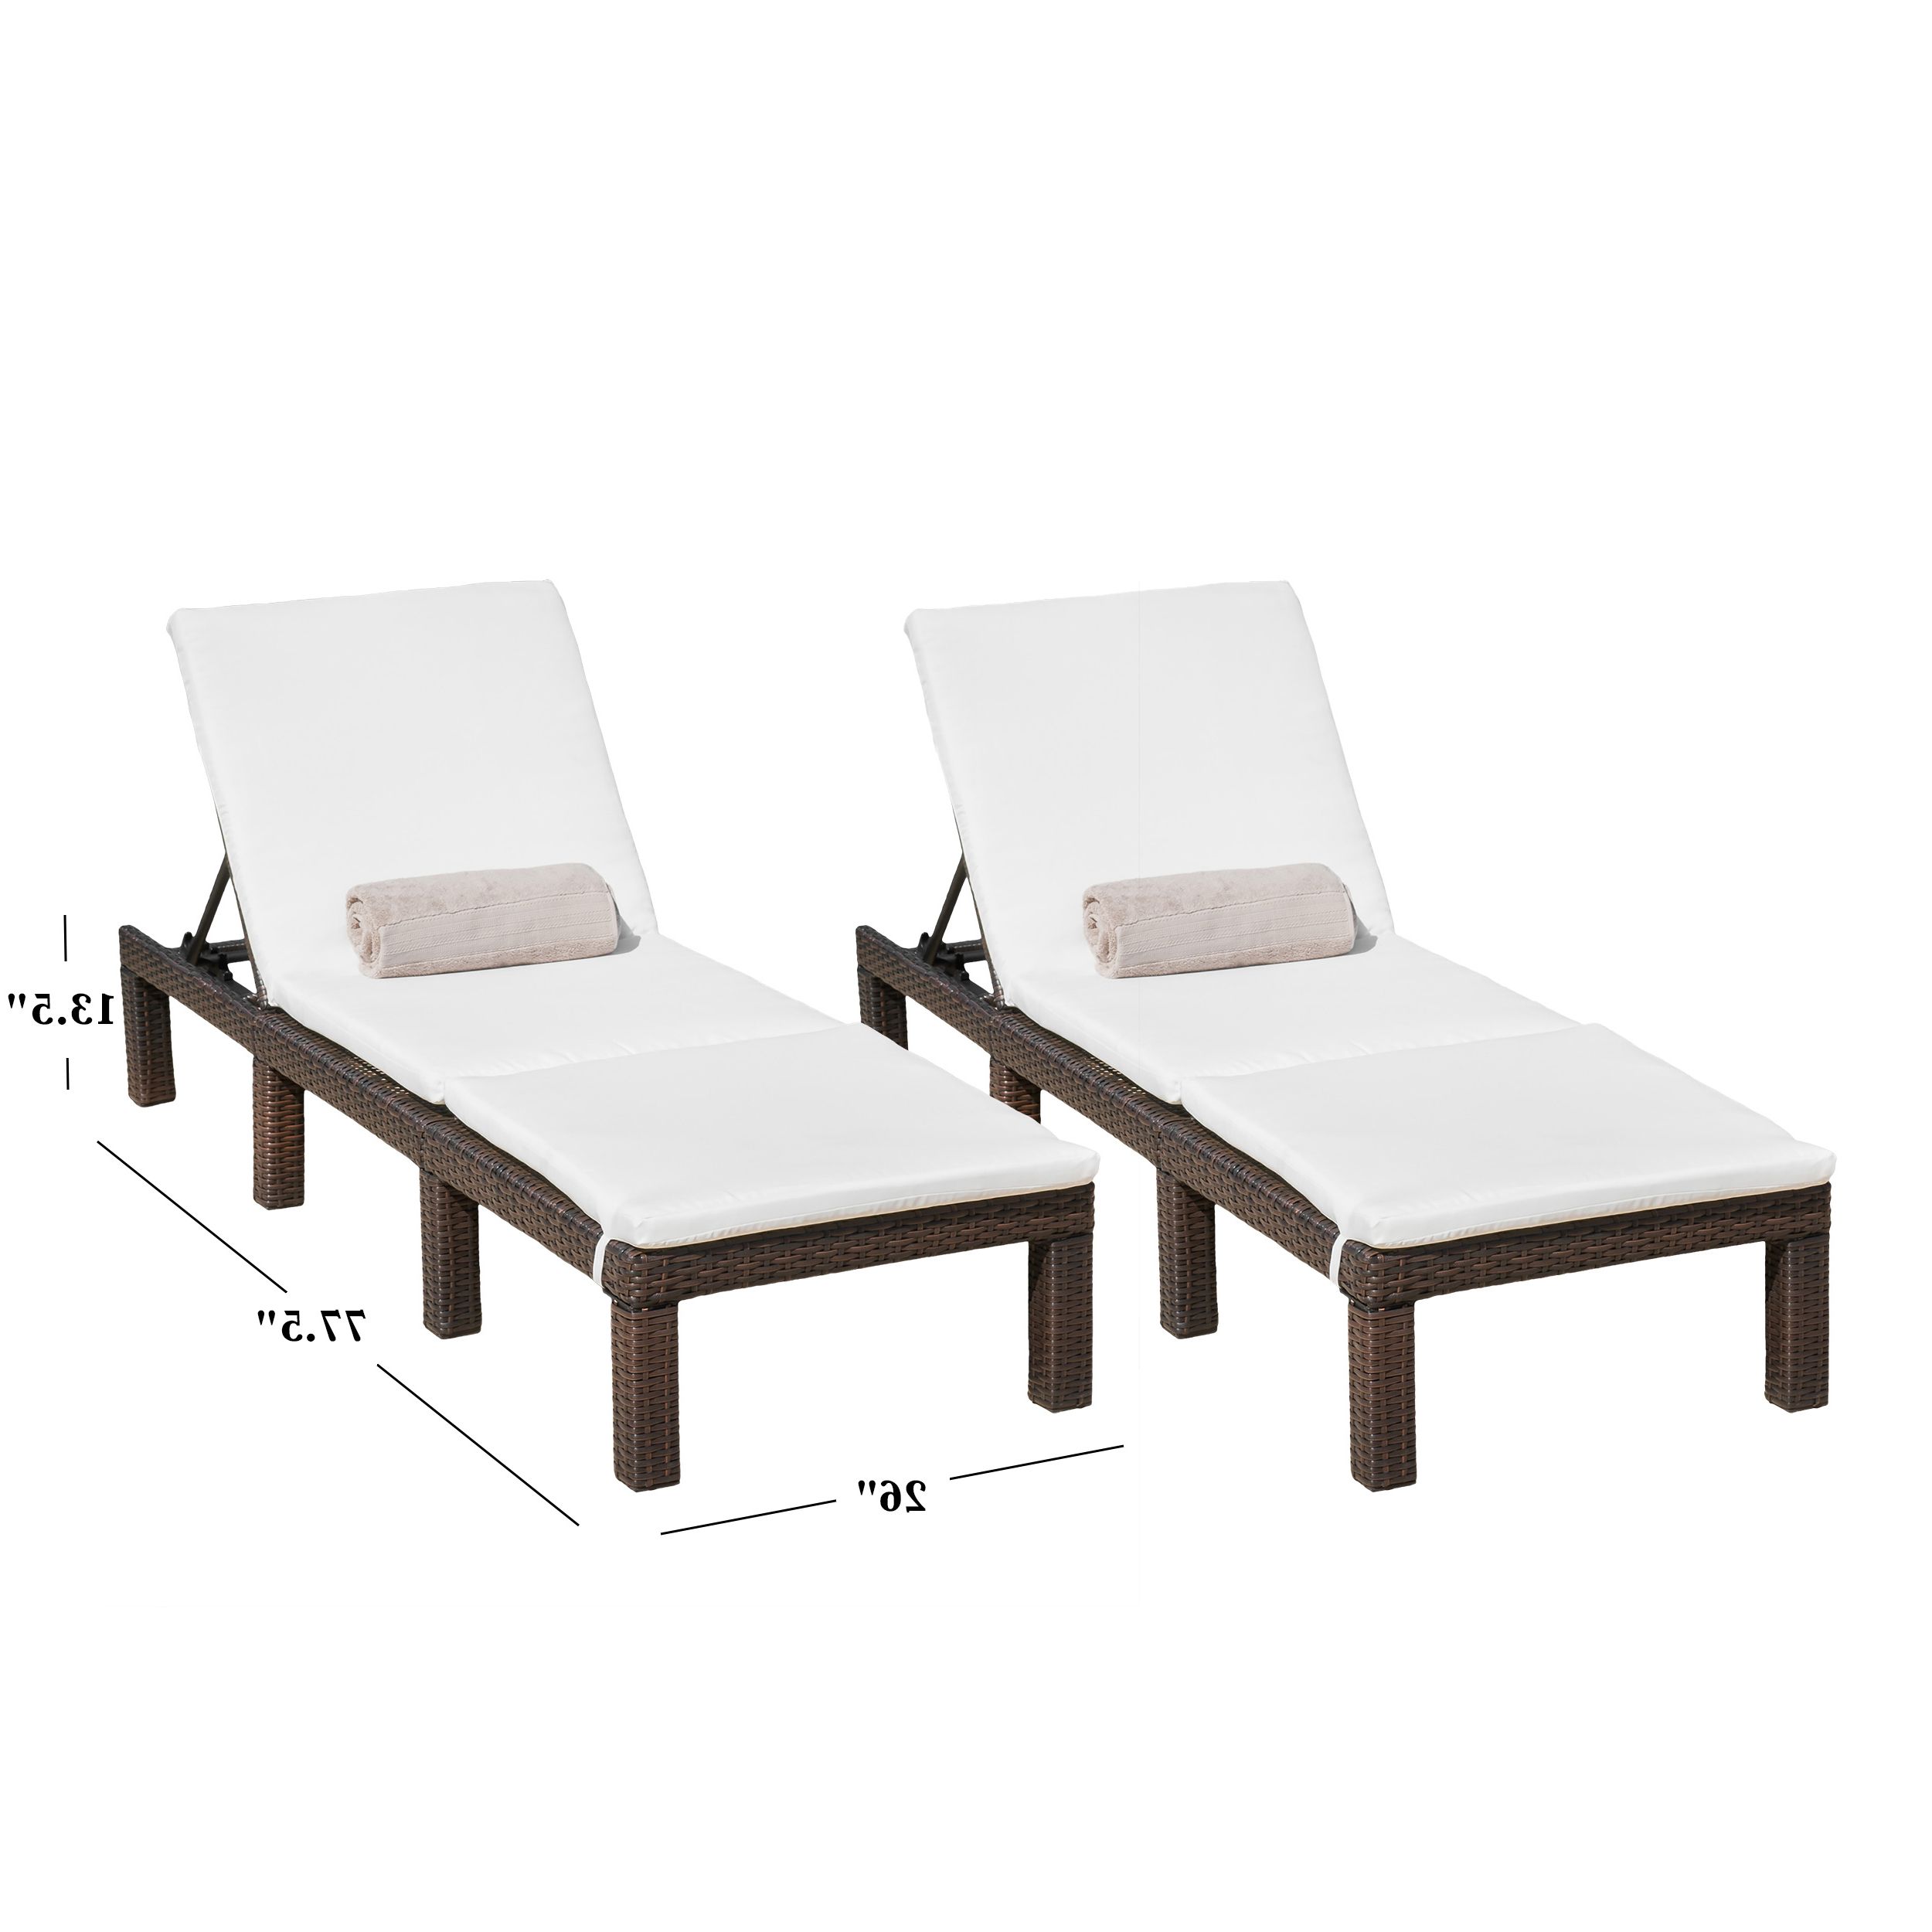 Wicker Adjustable Chaise Loungers With Cushion Throughout Well Known Aspen Outdoor Wicker Adjustable Chaise Lounges With Cushions (set Of 2) (View 9 of 25)